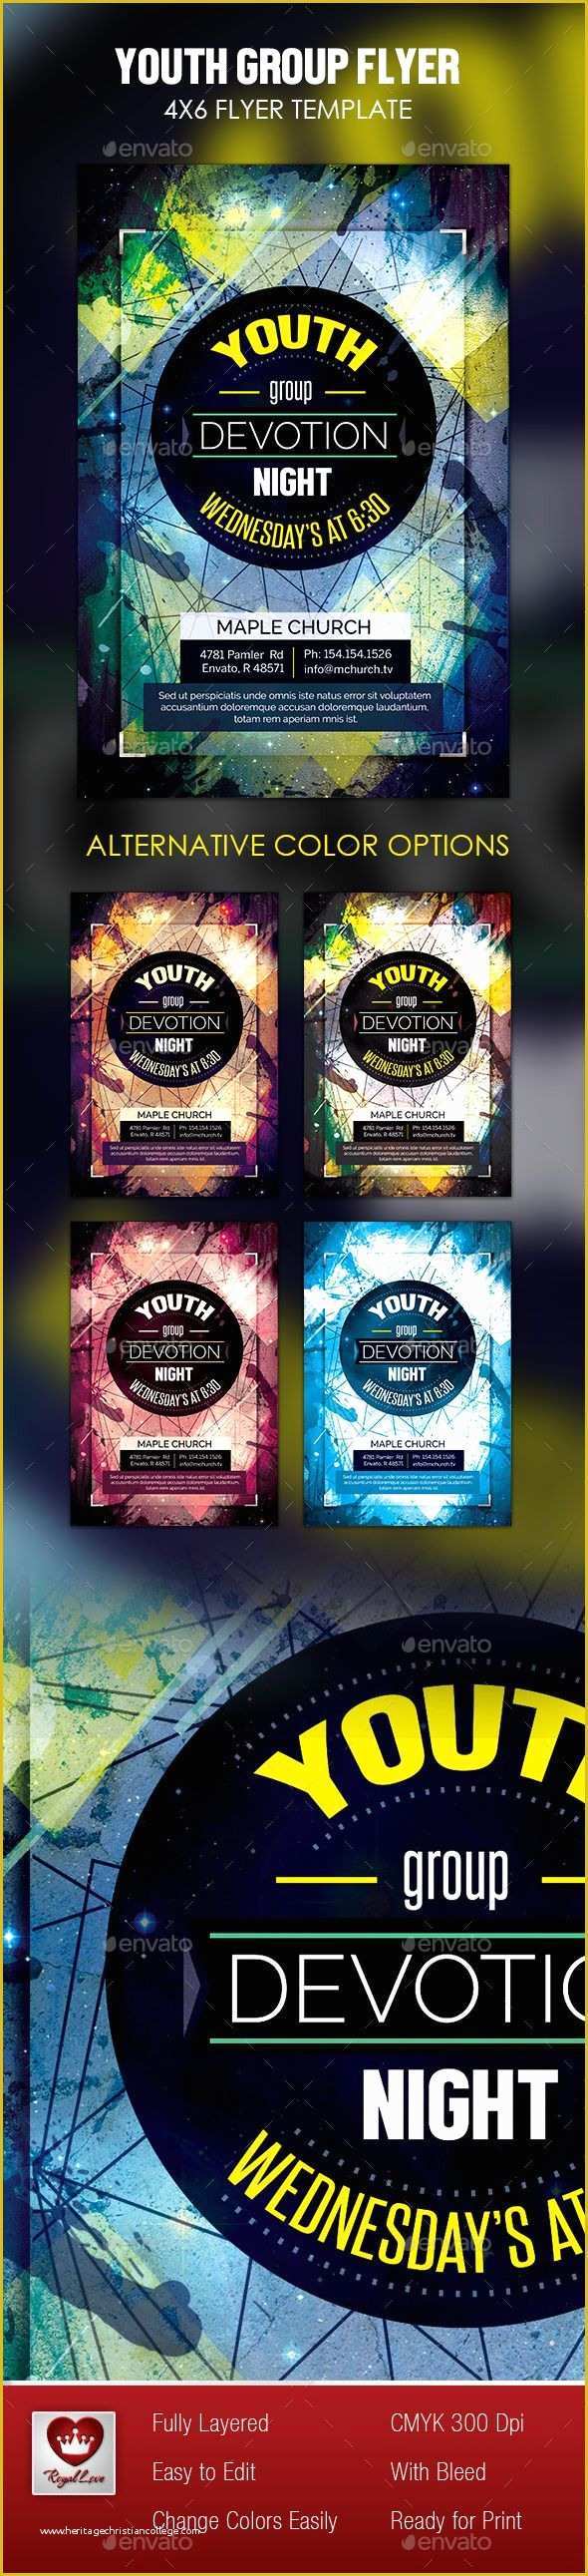 Youth Group Flyer Template Free Of 17 Best Images About Work On Pinterest